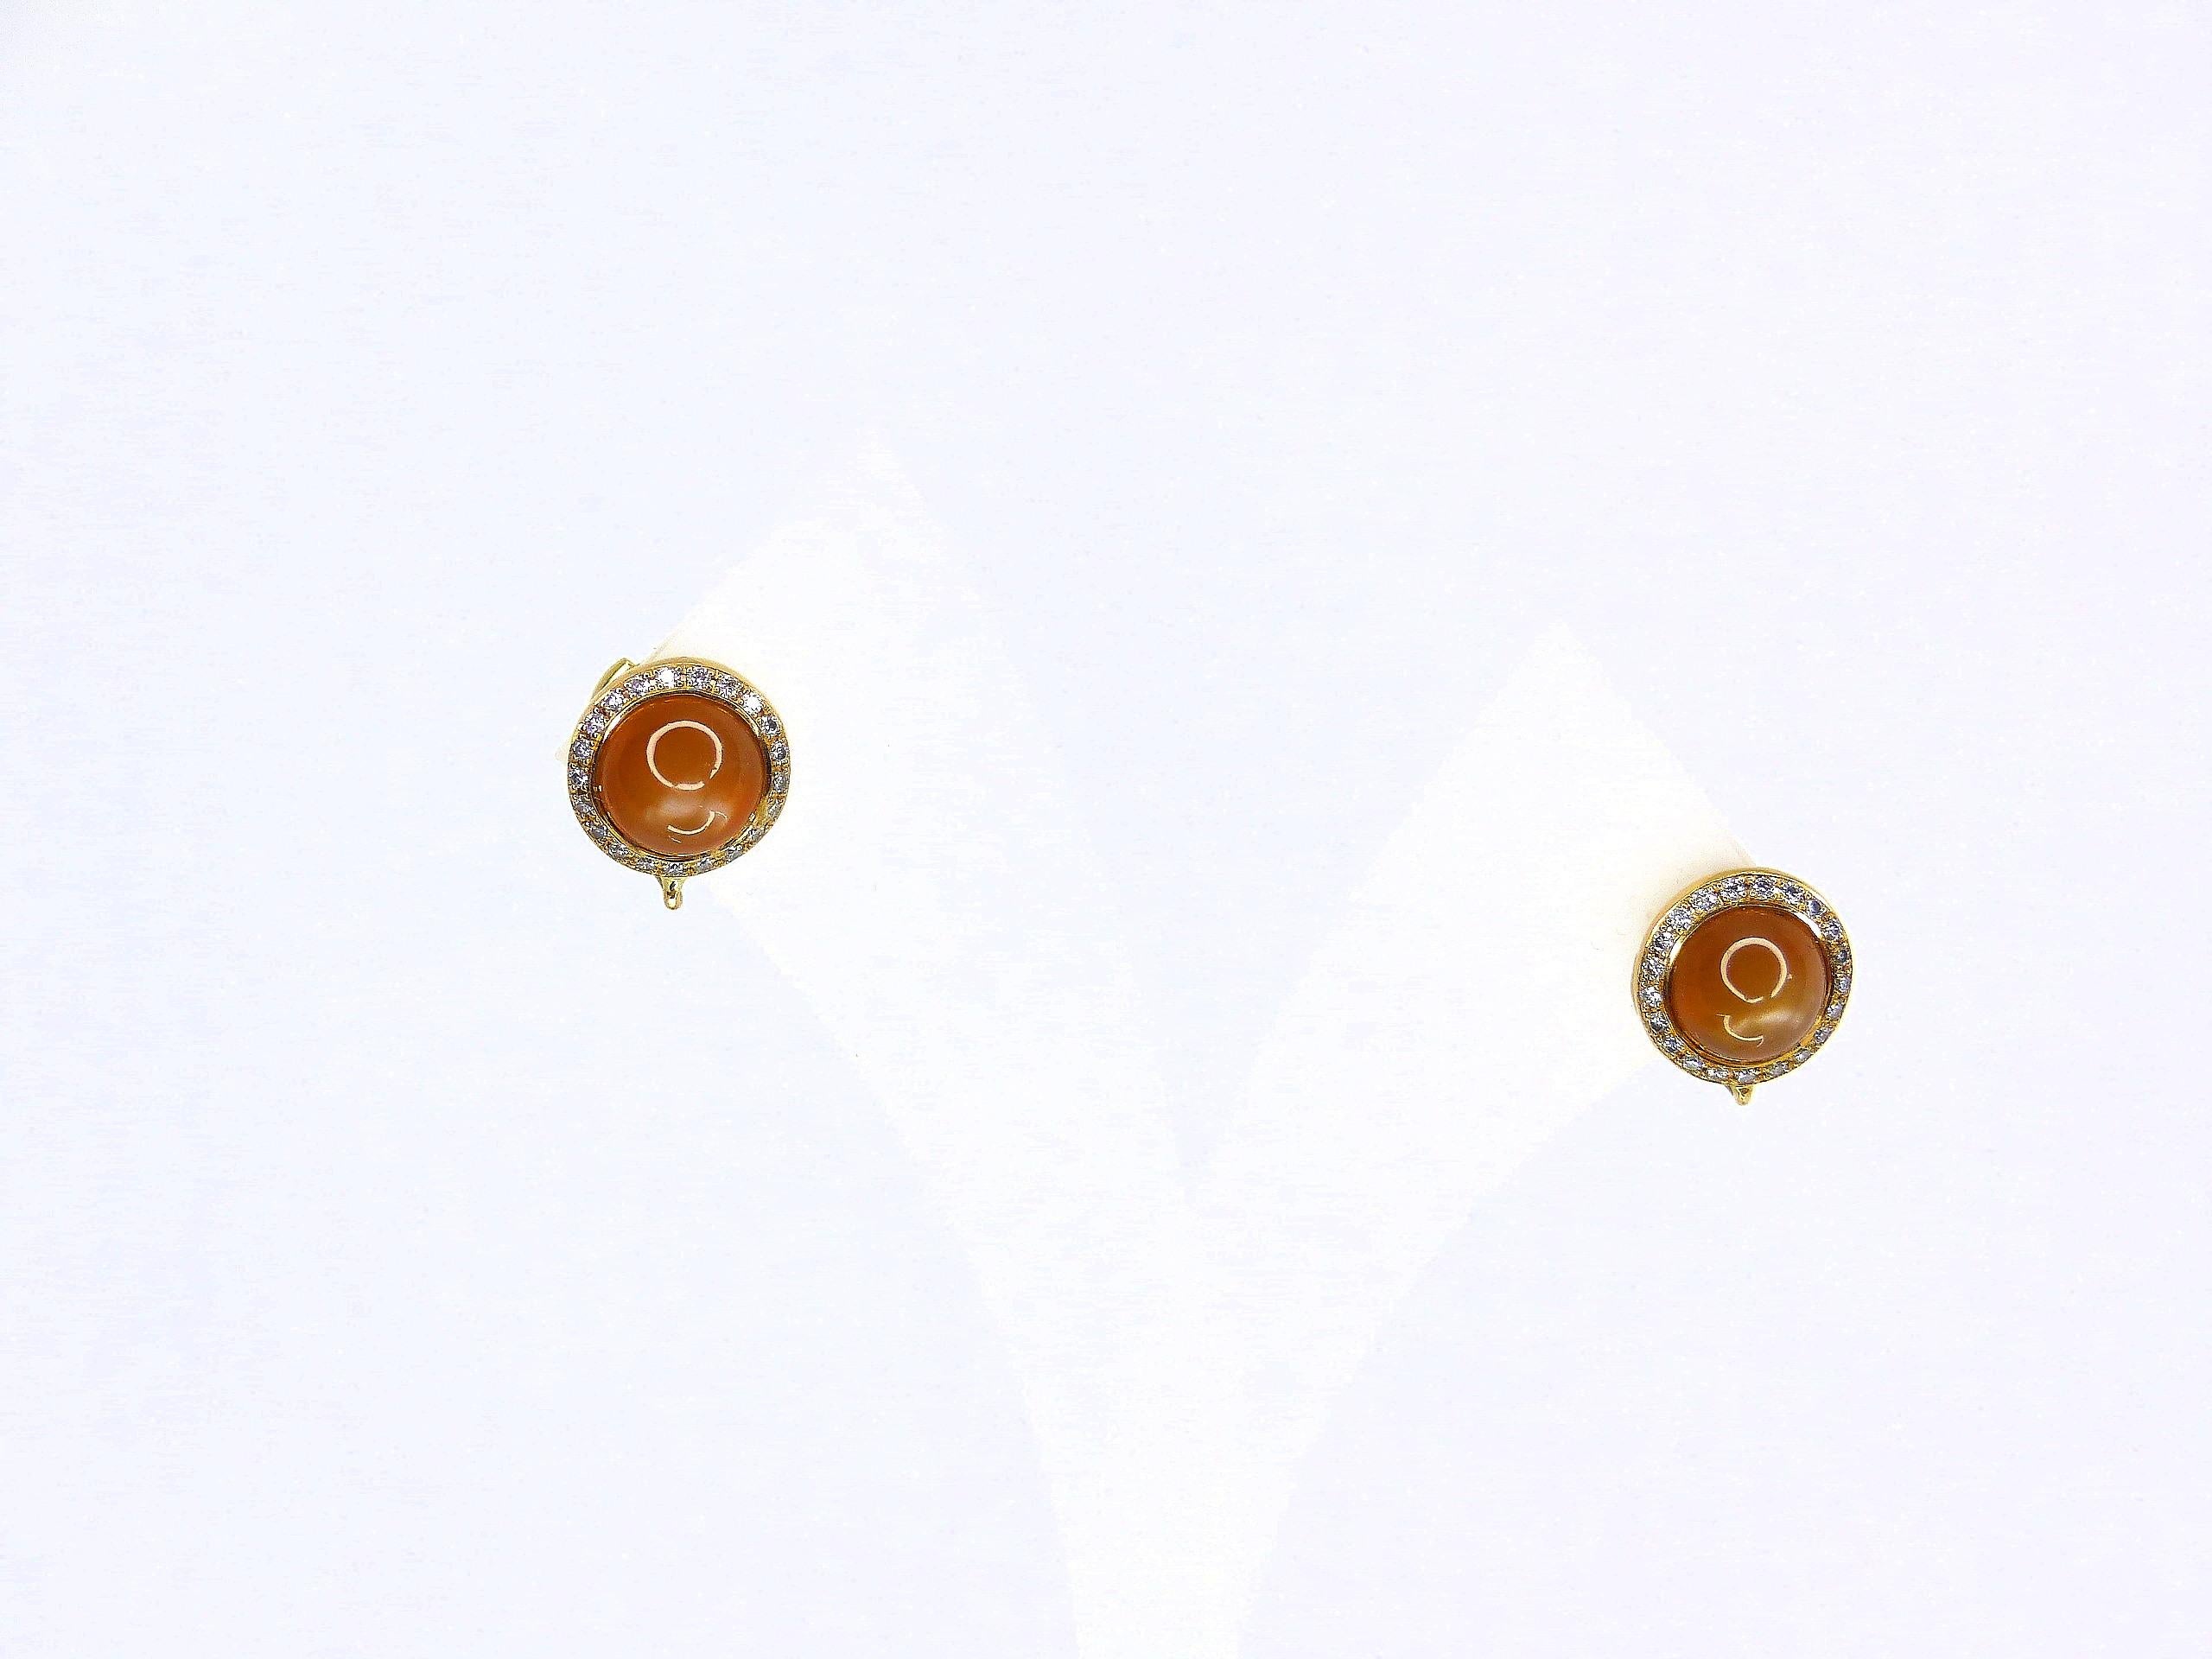 Cabochon Earrings in Rose Gold with 4 Brown Moonstones and 42 Diamonds   For Sale